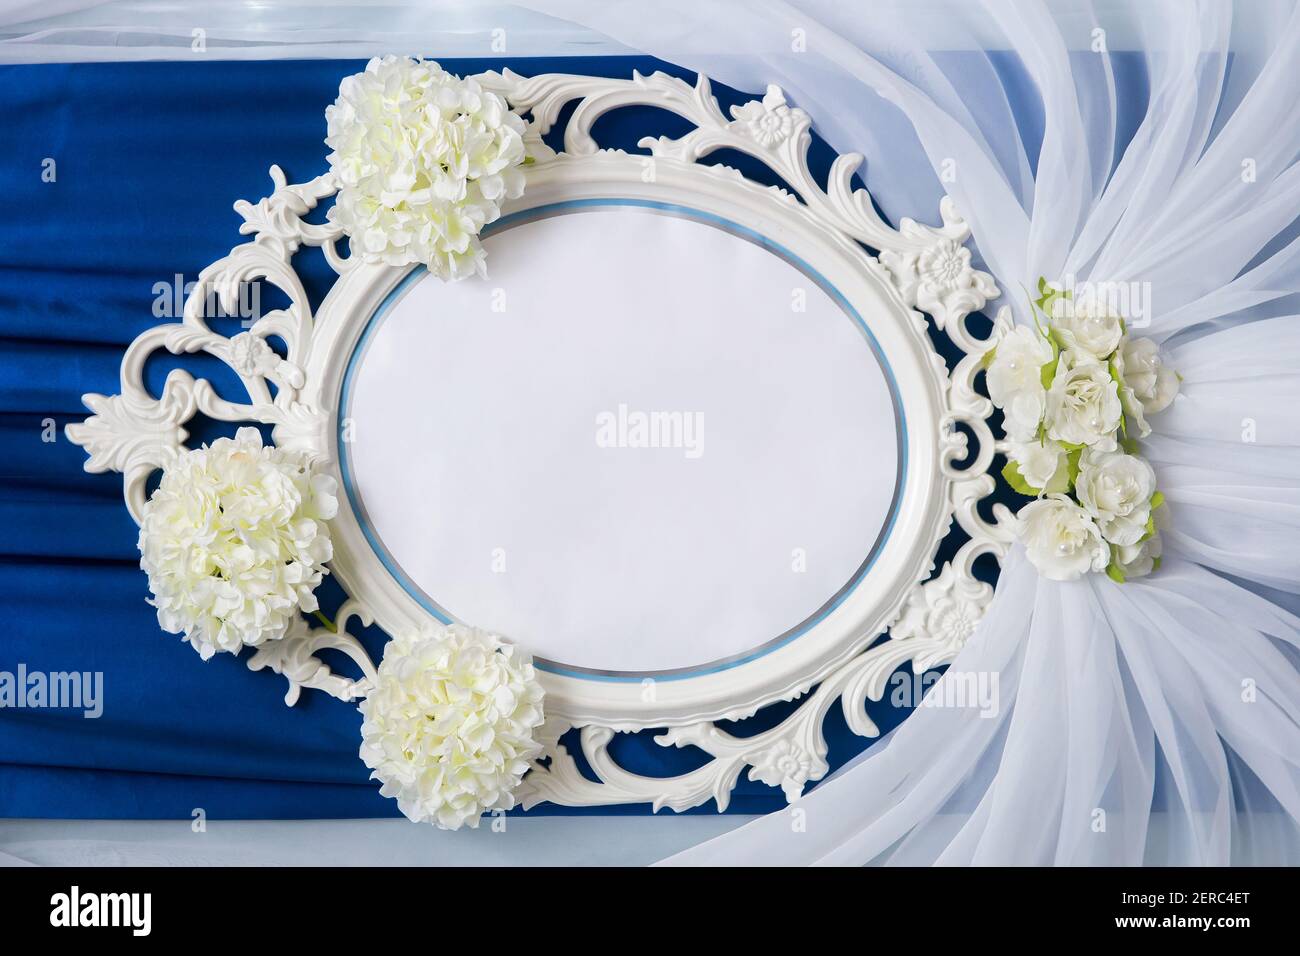 A round frame with a white space for text and design, decorated with flowers in the interior. Stock Photo